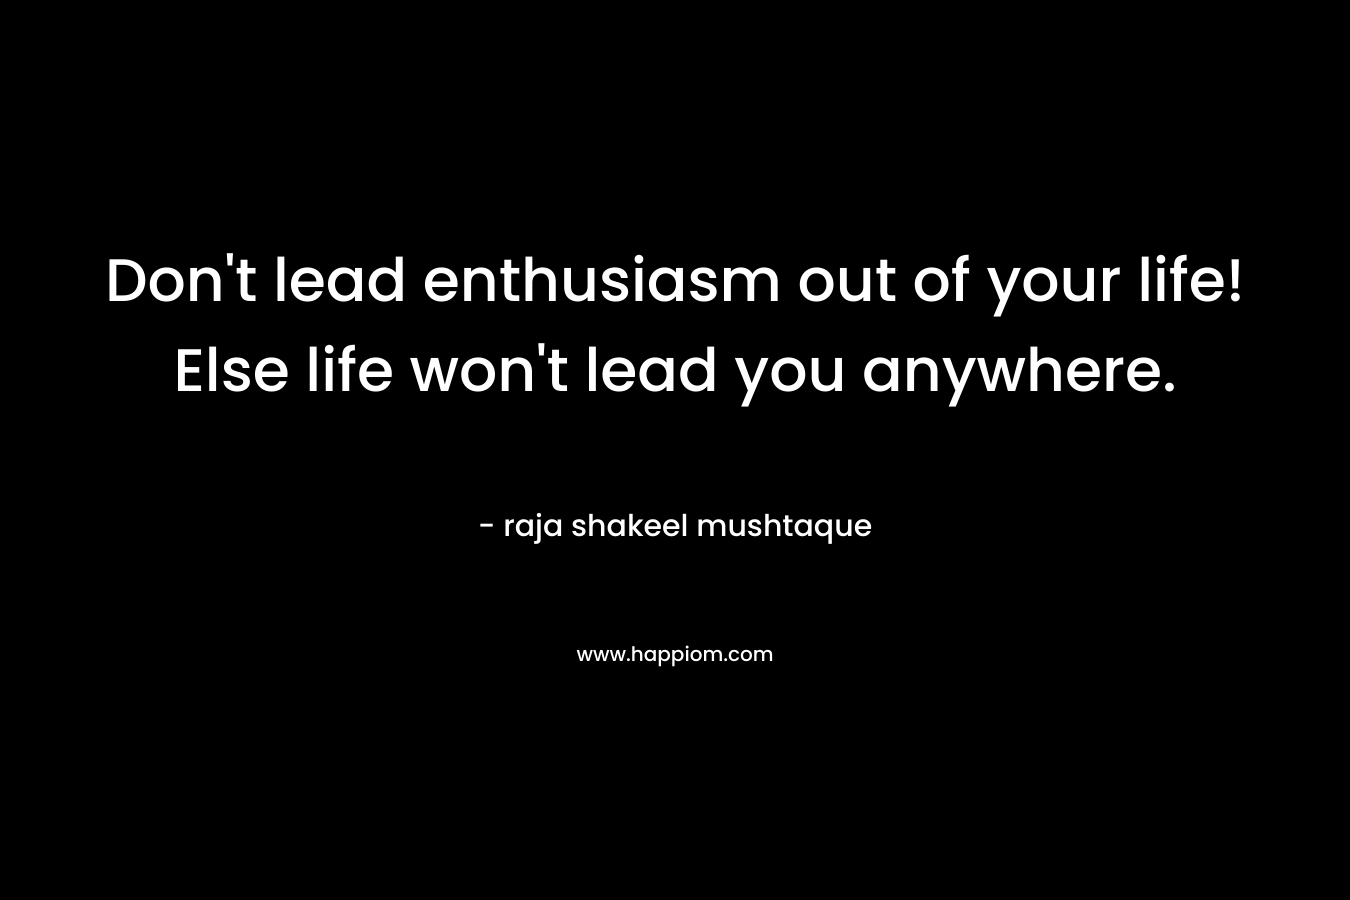 Don't lead enthusiasm out of your life! Else life won't lead you anywhere.